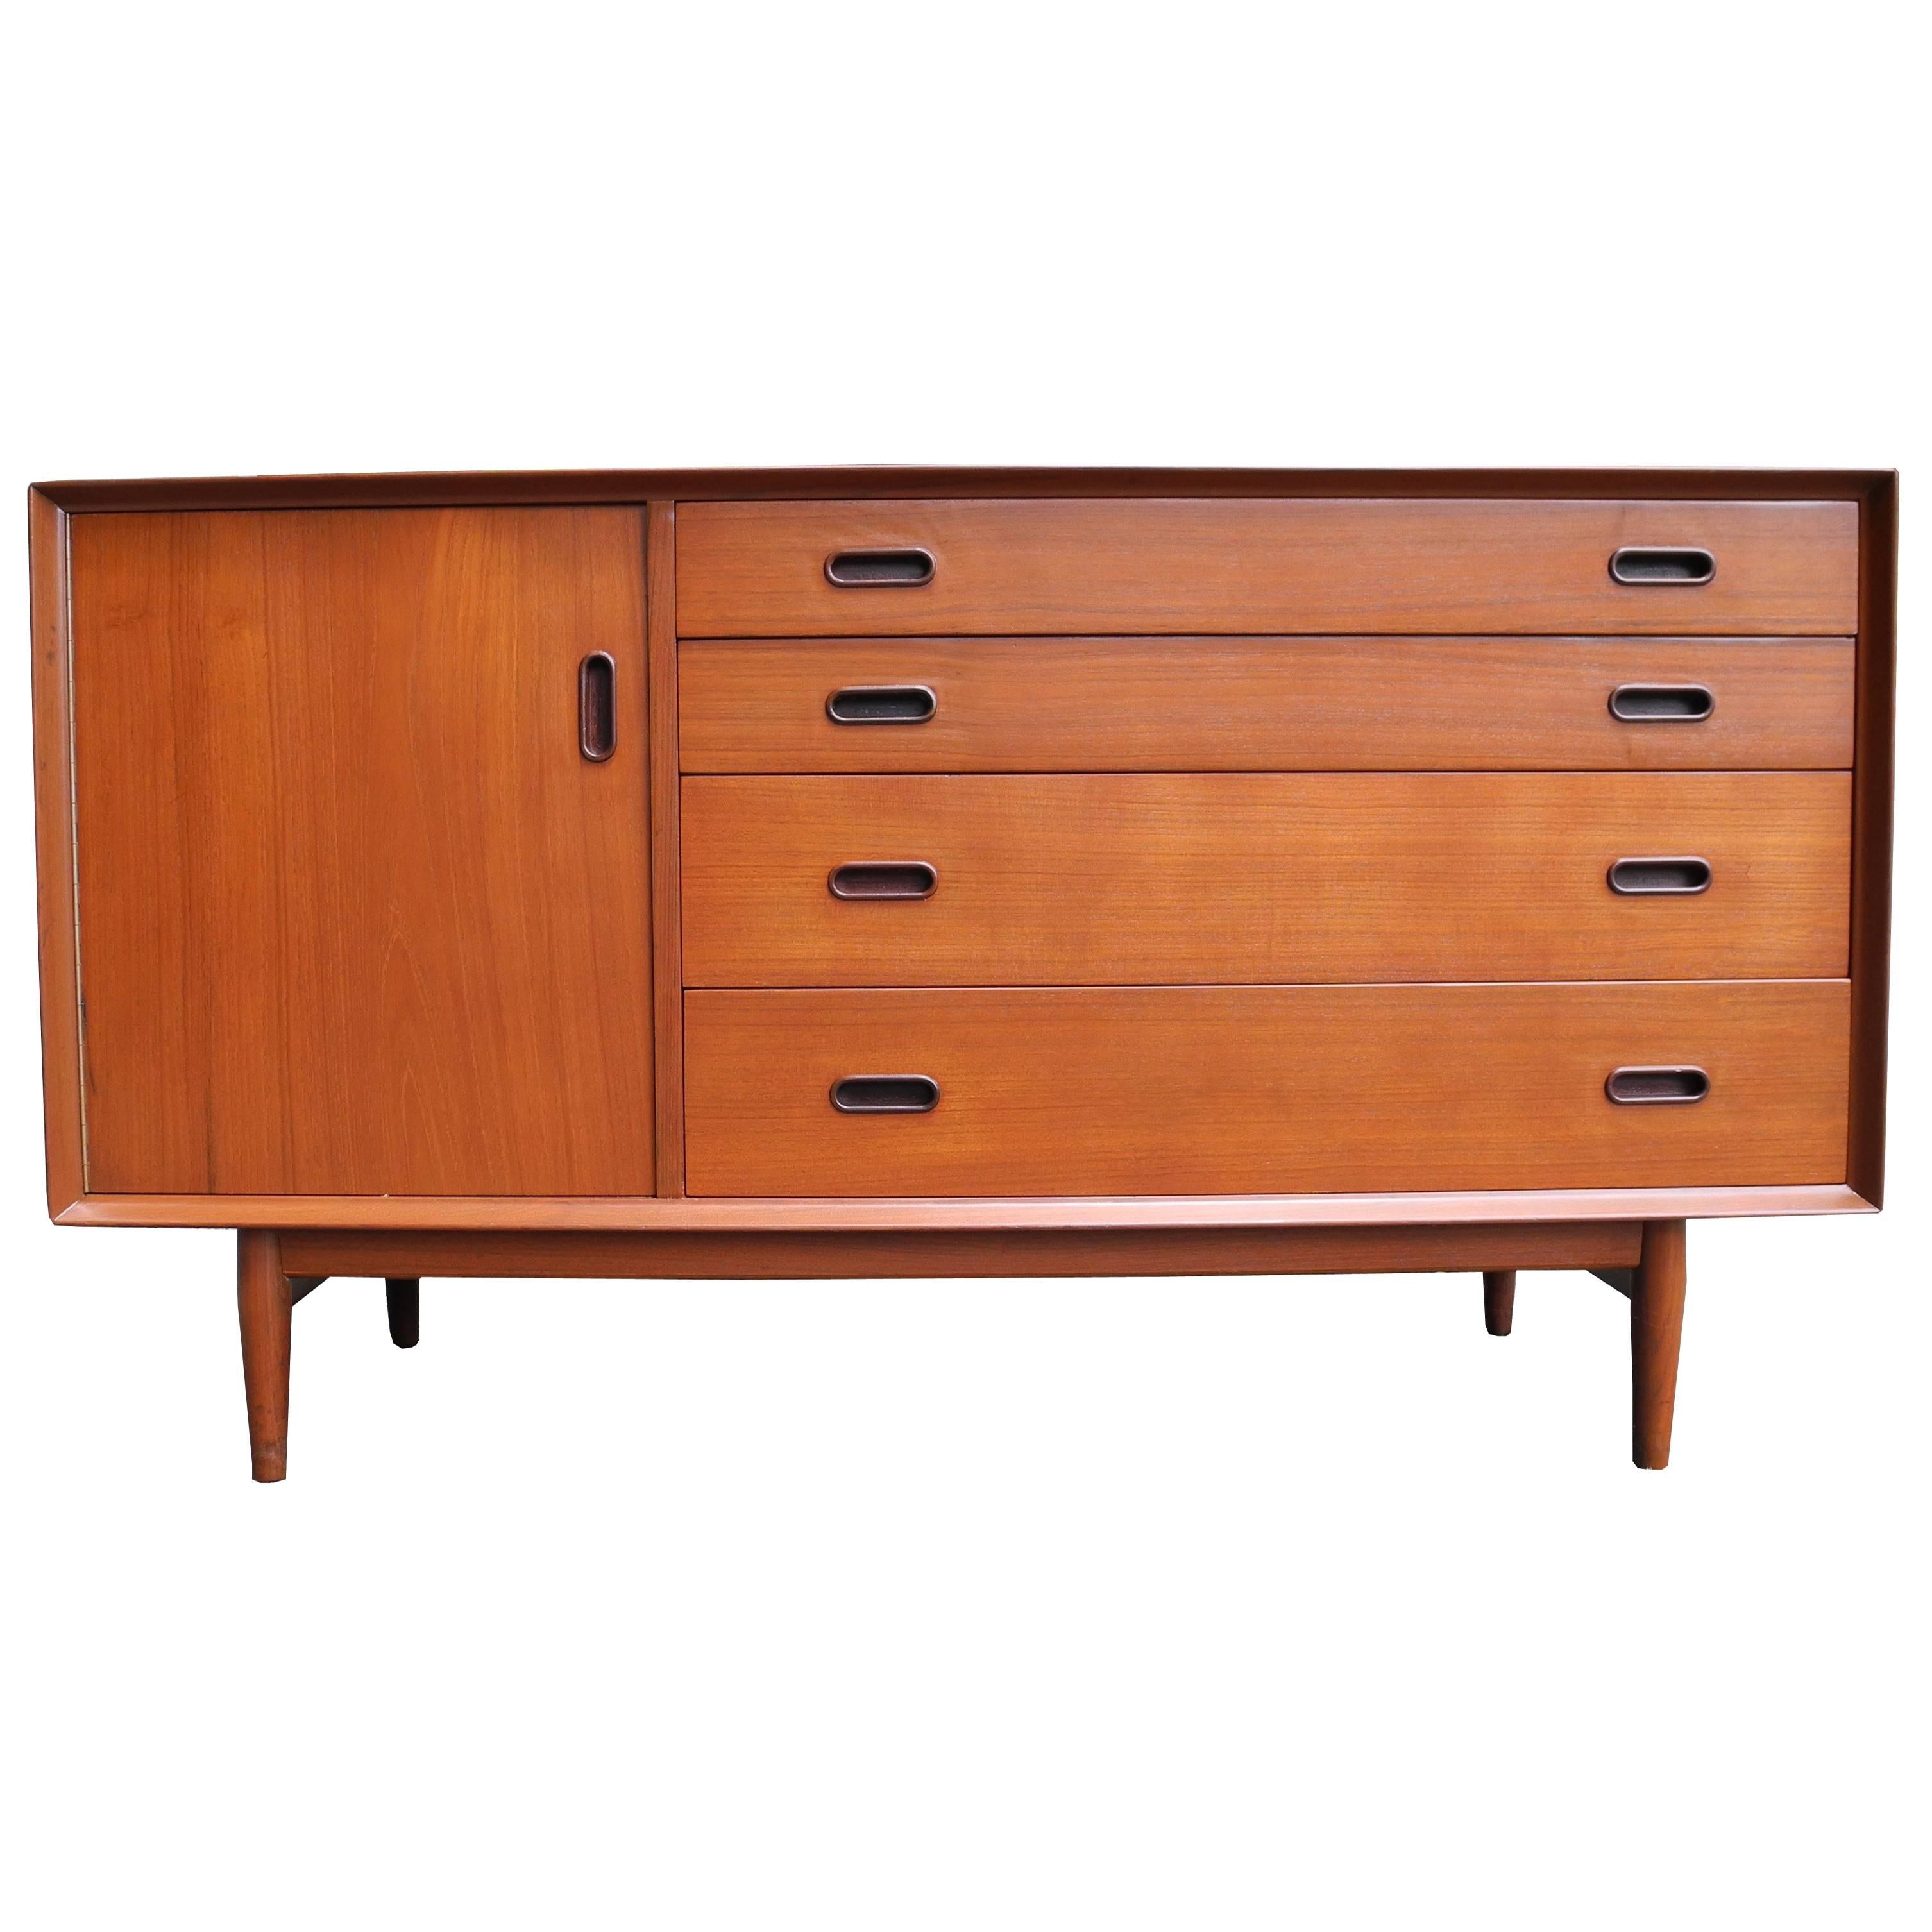 Danish Mid-Century Modern Teak, Drawers and Cabinet Sideboard by Arne Vodder For Sale